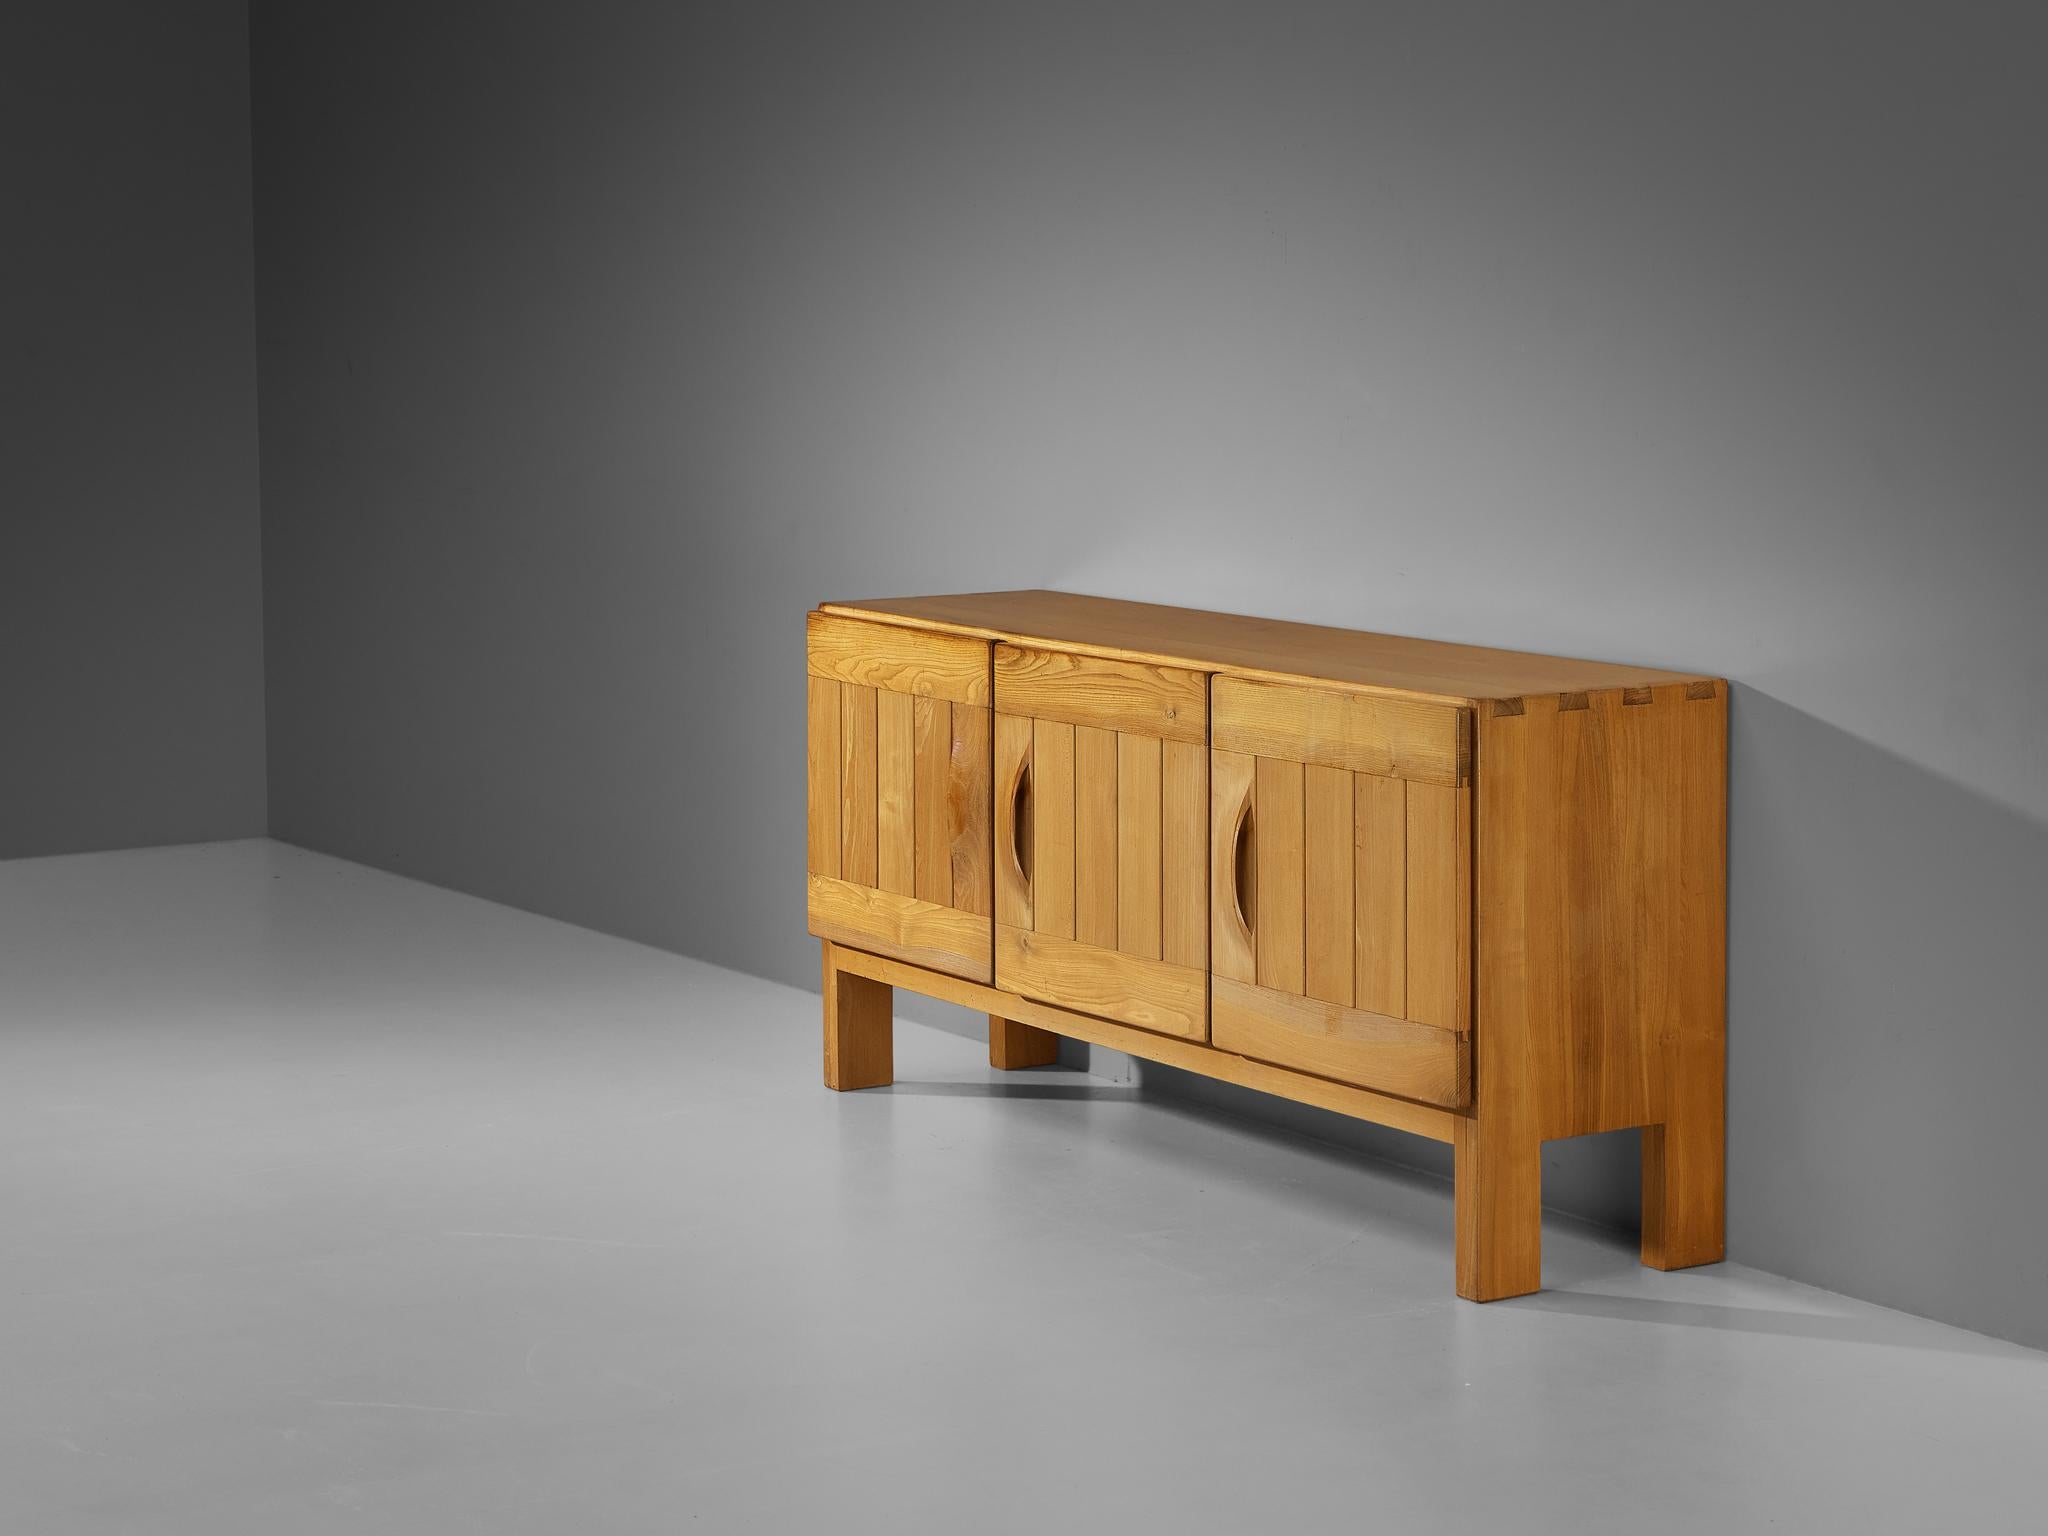 Maison Regain, sideboard, elm, France, 1960s.

This sideboard by Maison Regain combines a simplified yet complex design combined with nifty, solid construction details that characterizes its design. The three well-balanced, sturdy doors are